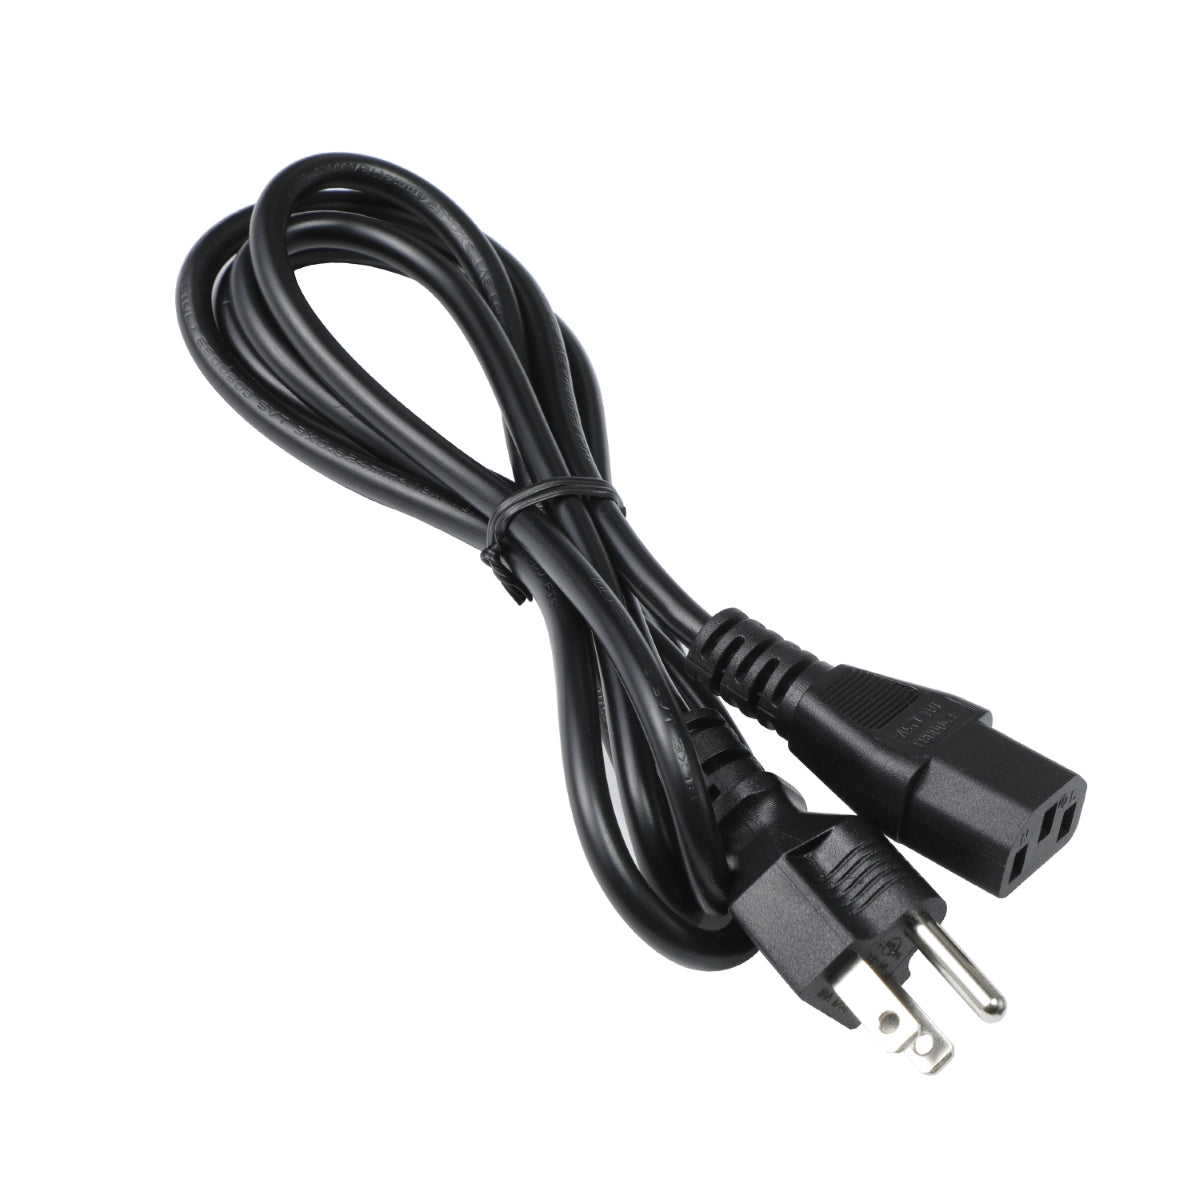 Power Cord for Dell P2715Q Ultra HD Monitor